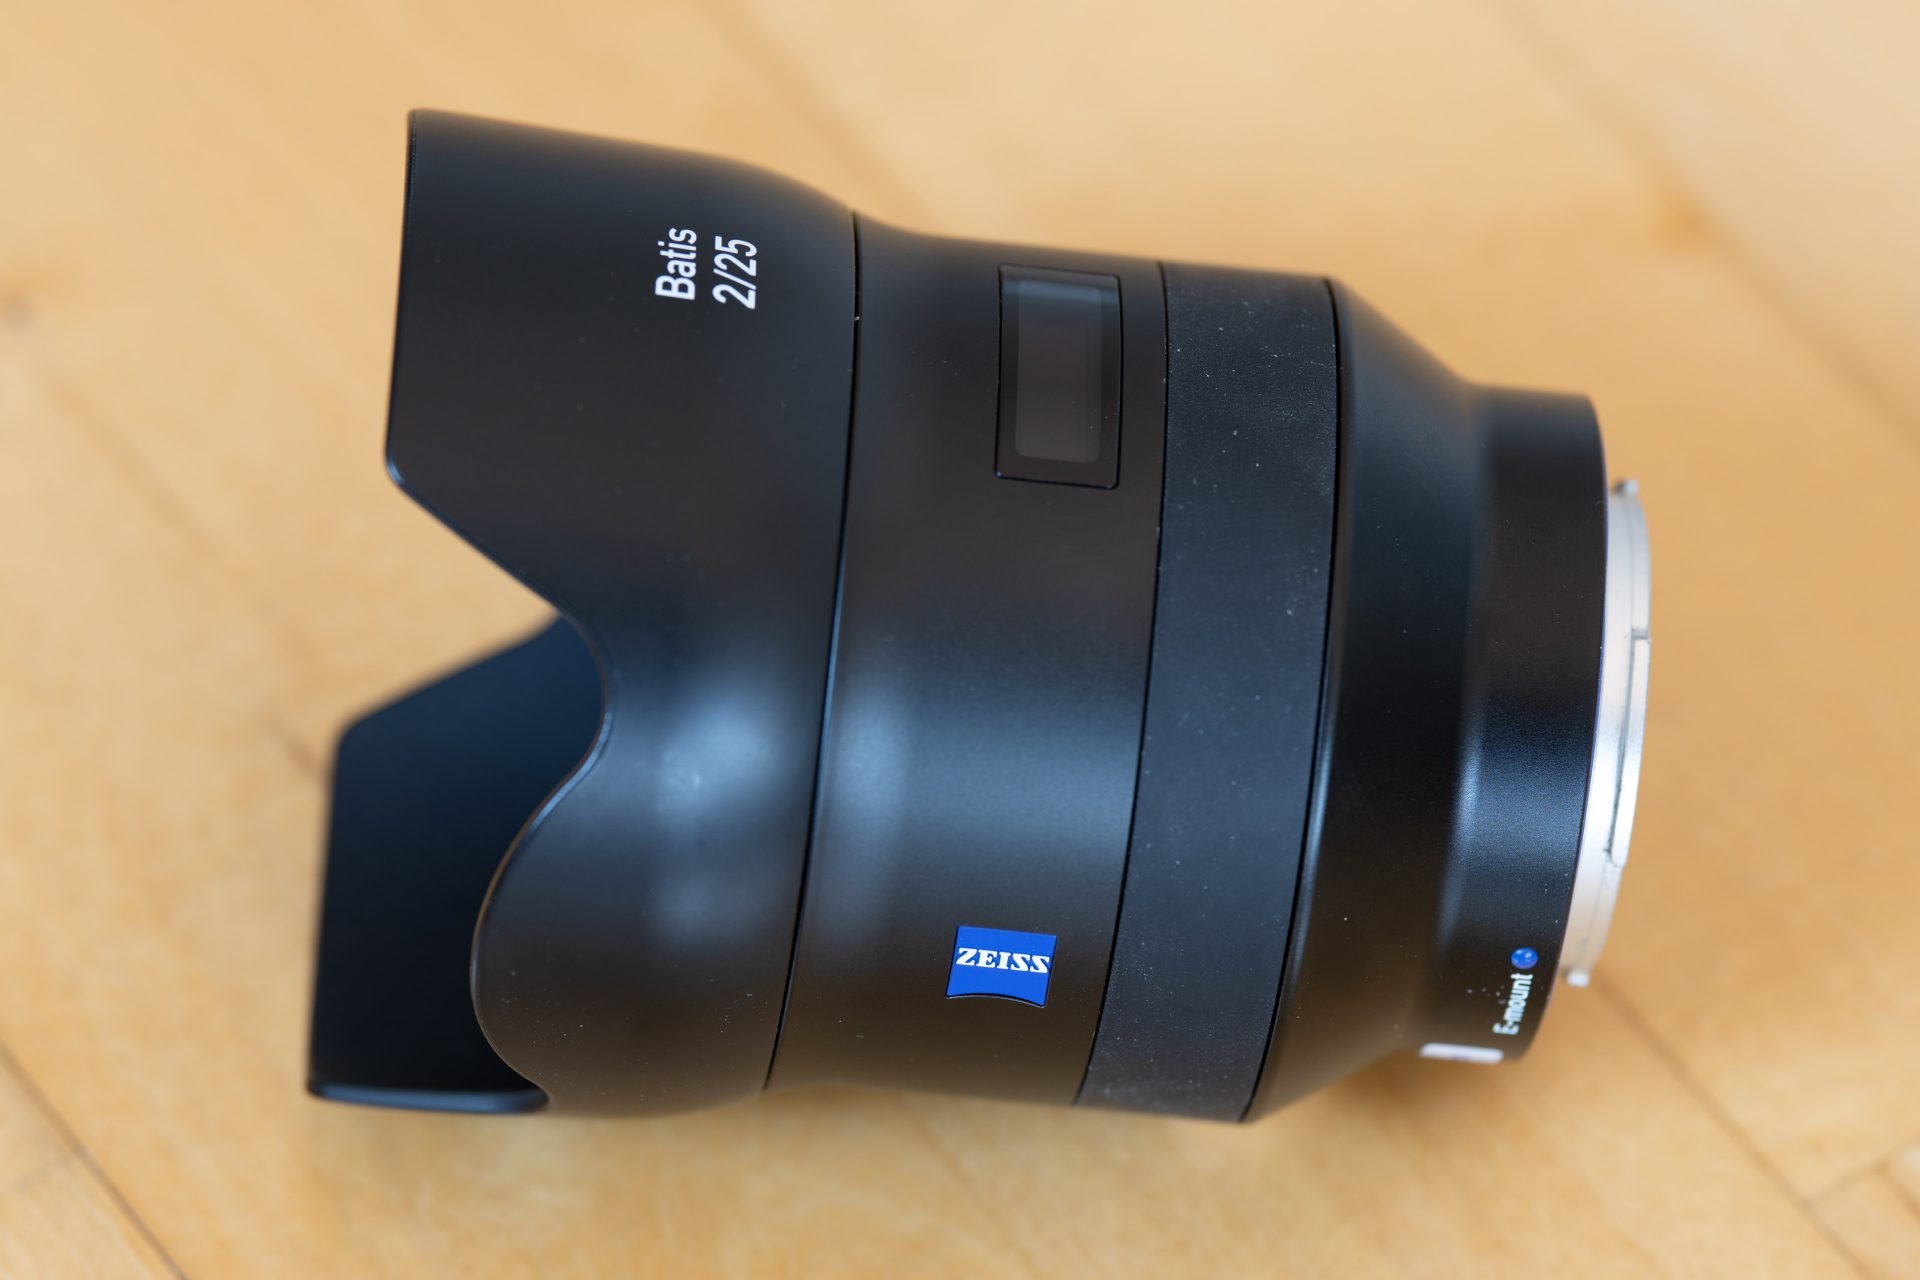 Zeiss 25mm Batis f2 review | Cameralabs